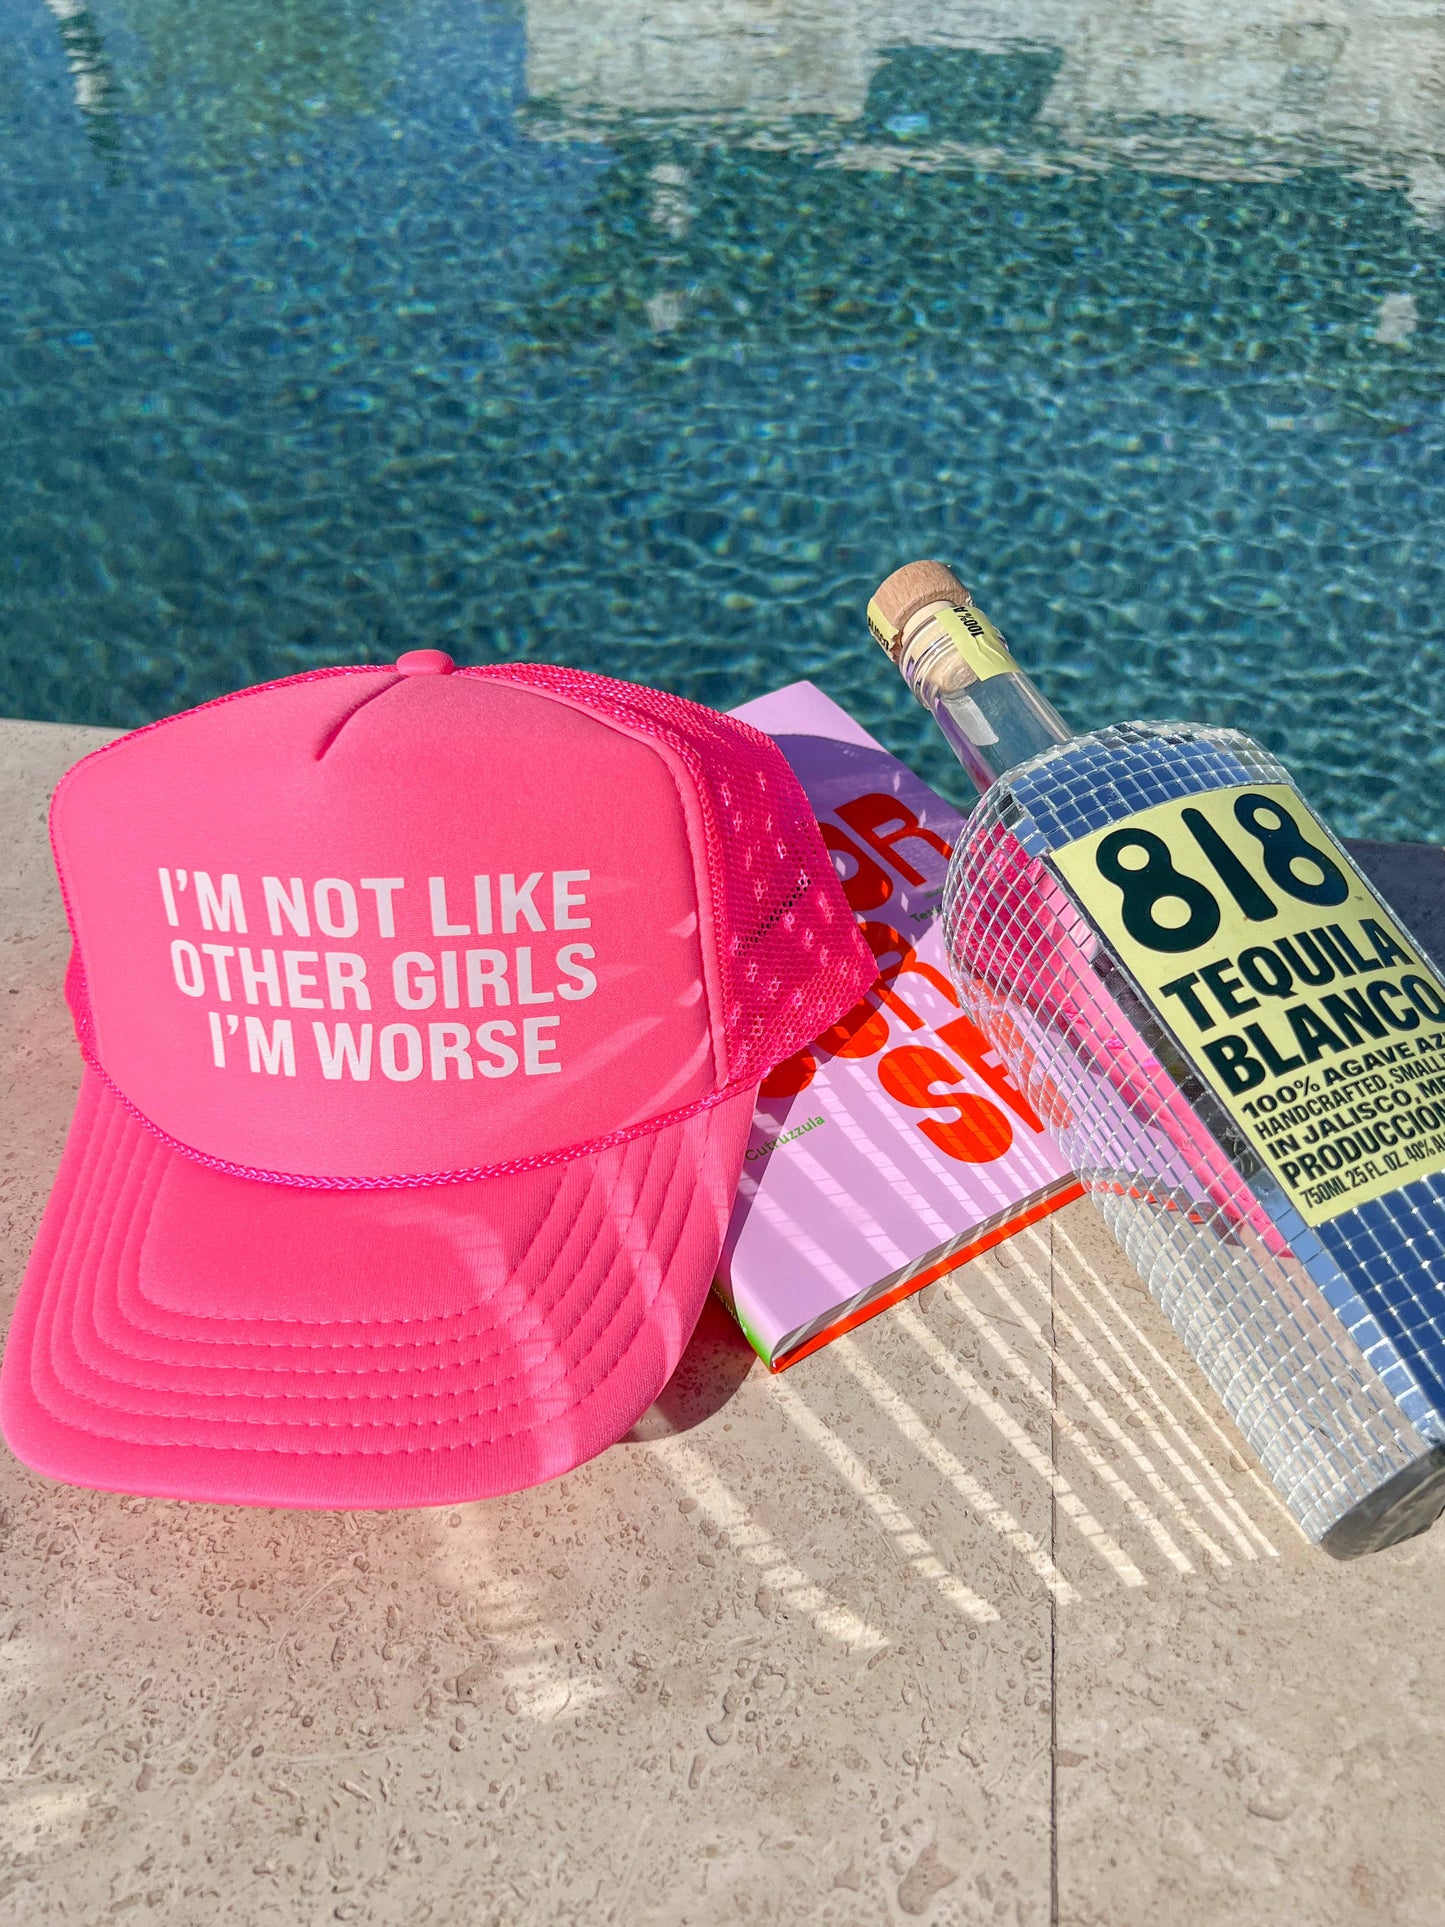 I'm Not Like Other Girls I'm Worse Trucker Hats - Summer Hat: Hot pink/white